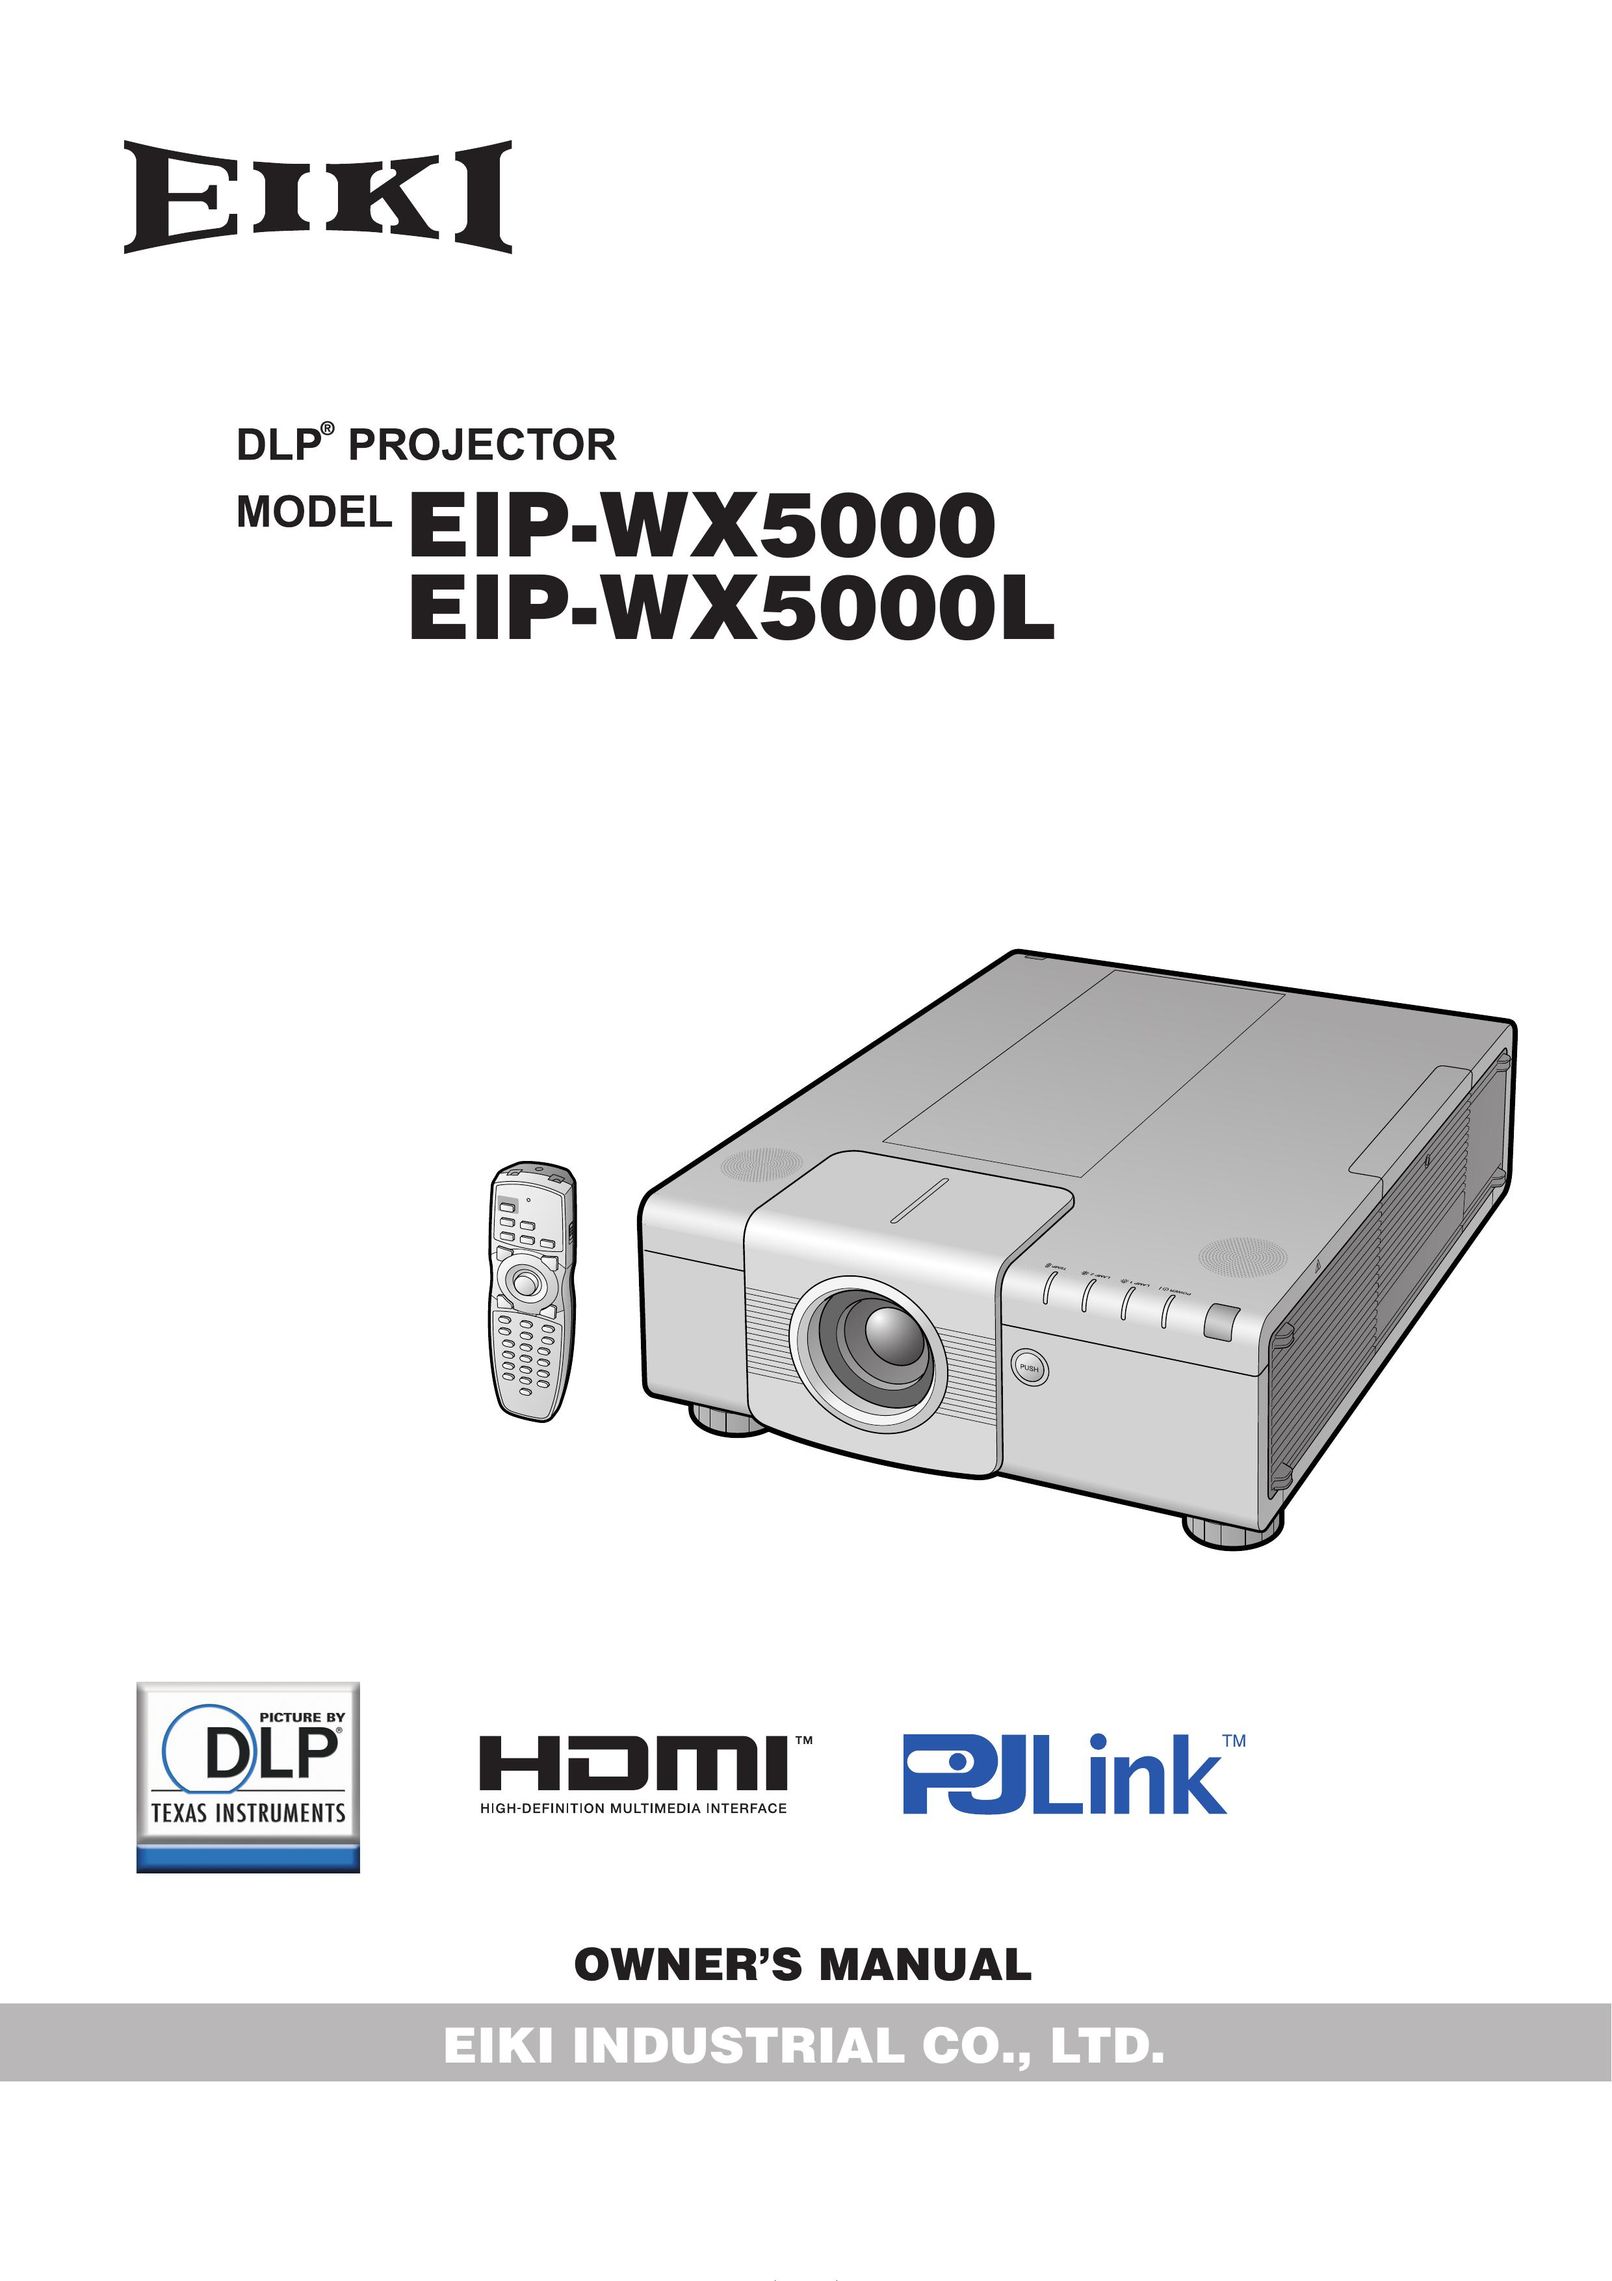 Eiki EIP-WX5000 Projector User Manual